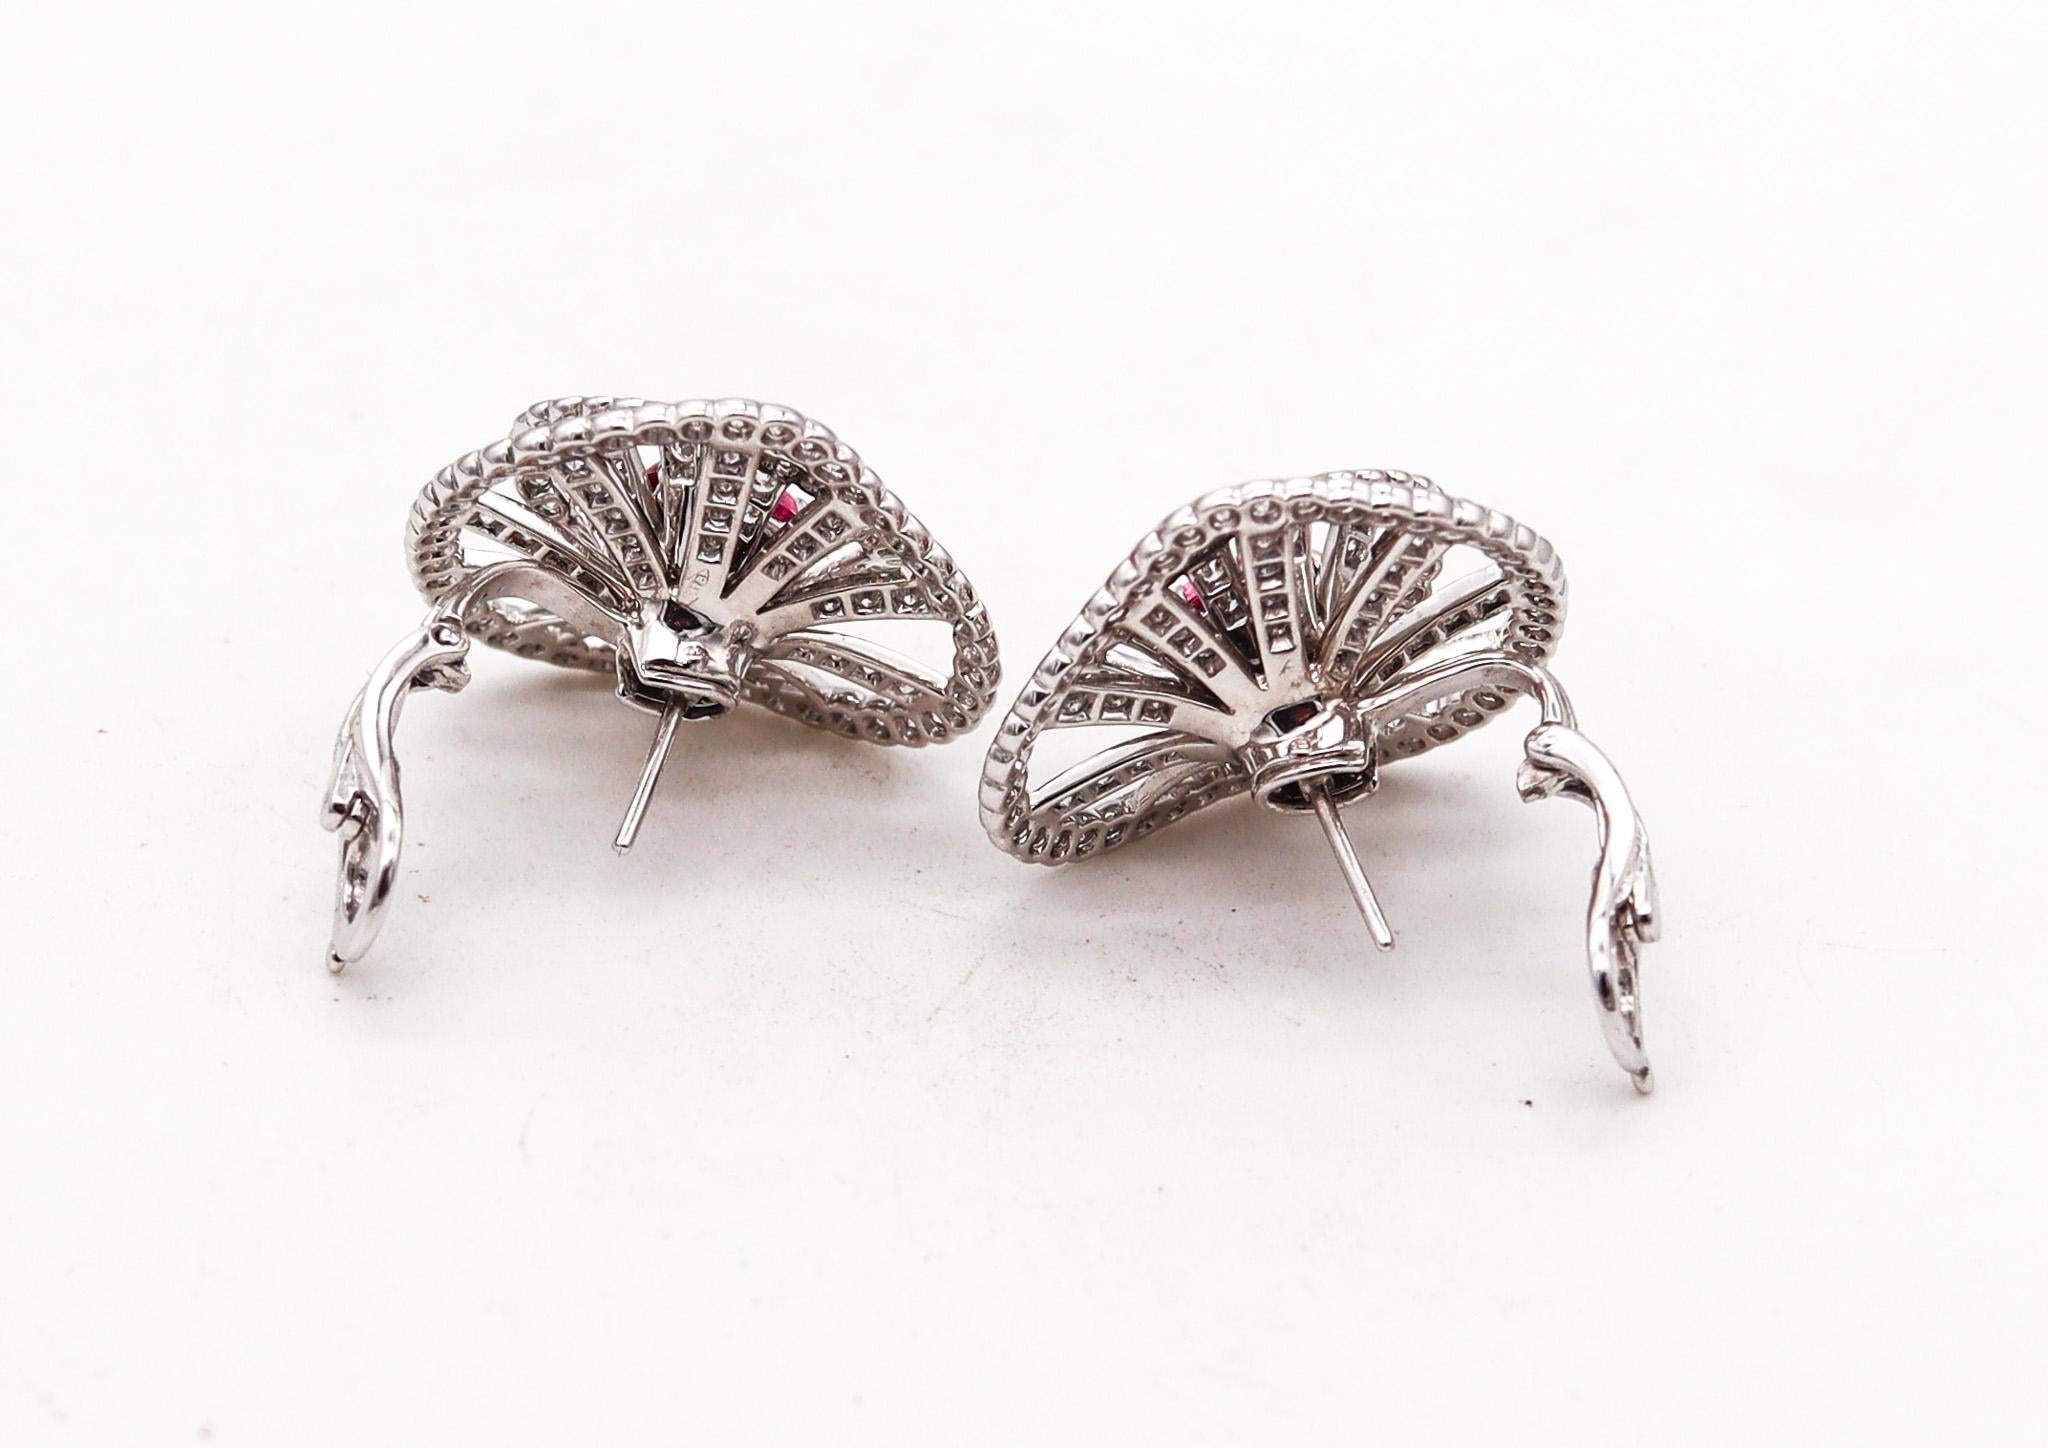 Brilliant Cut Boucheron Paris Earrings In 18Kt Gold With 10.42 Ctw In Diamonds And Tourmalines For Sale